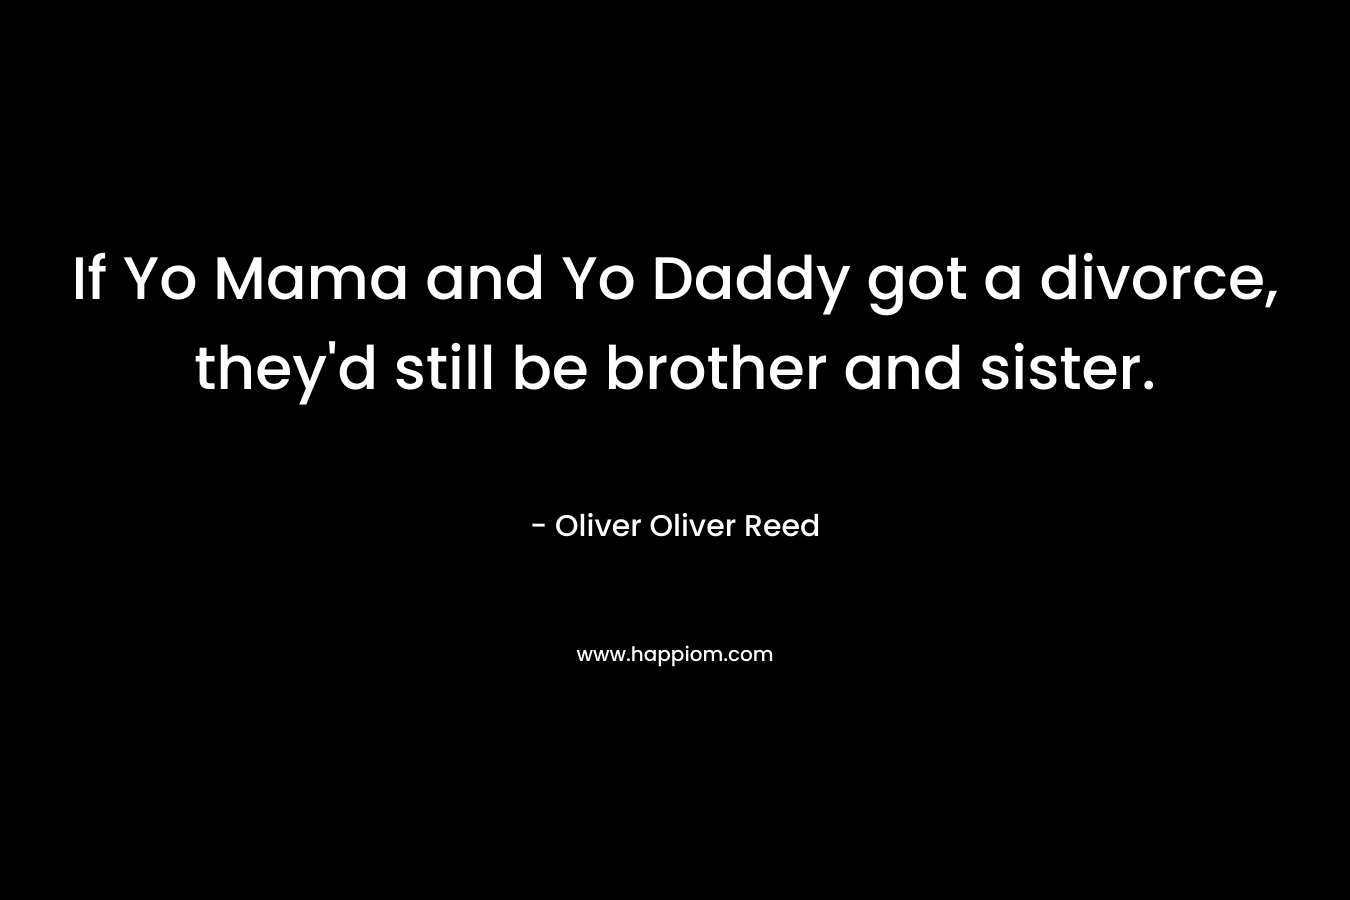 If Yo Mama and Yo Daddy got a divorce, they’d still be brother and sister. – Oliver Oliver Reed